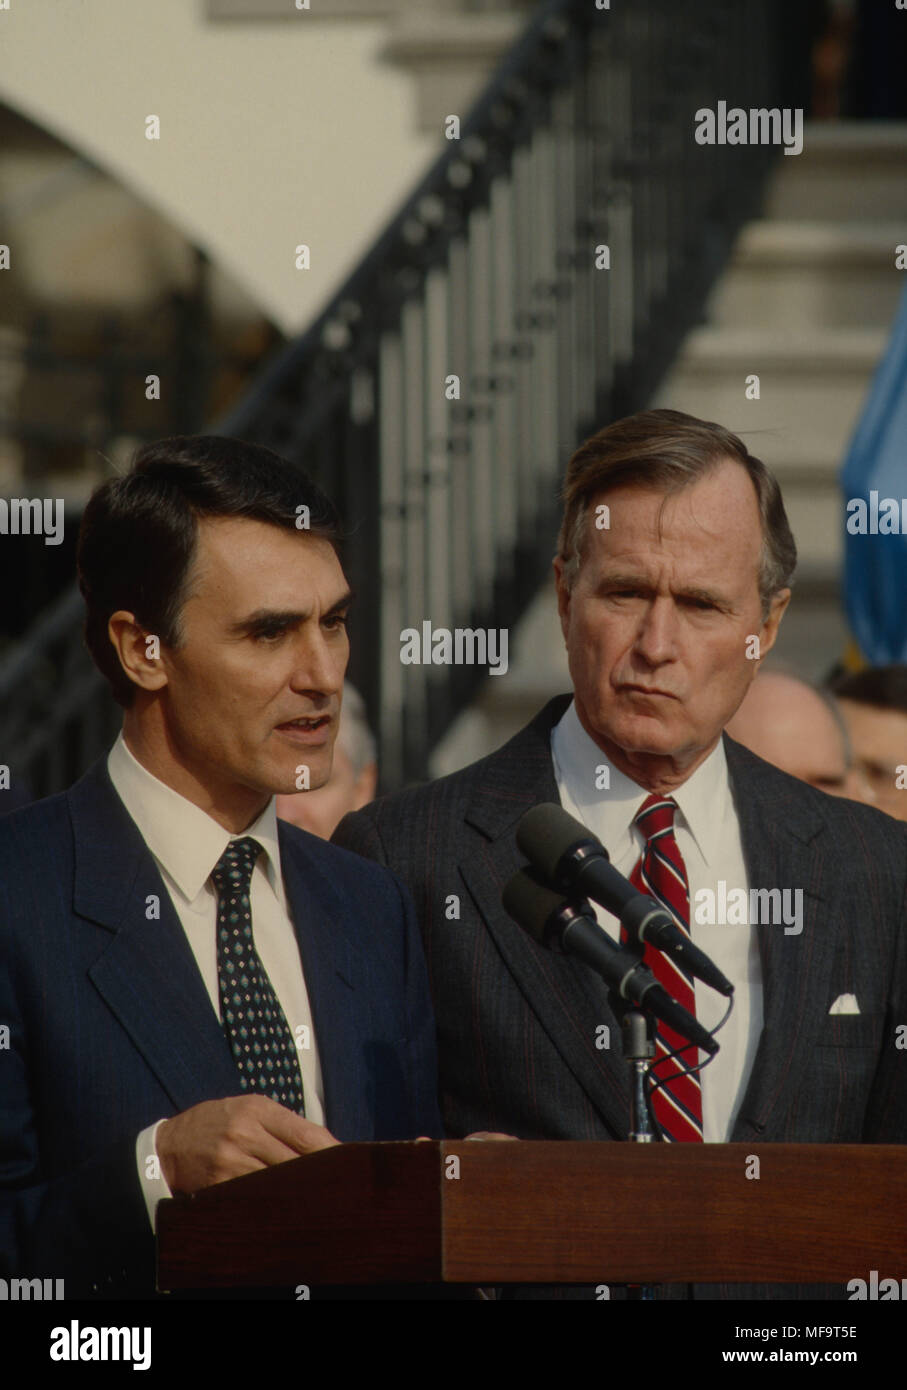 President George H.W. Bush and Prime Minister of Portugal Anibal Cavaco Silva deliver remarks at the podium outside the South Portico diplomatic entance as the conclusion of the Mr. SIlvas's visit to the White House Credit: Mark Reinstein/MediaPunch Stock Photo